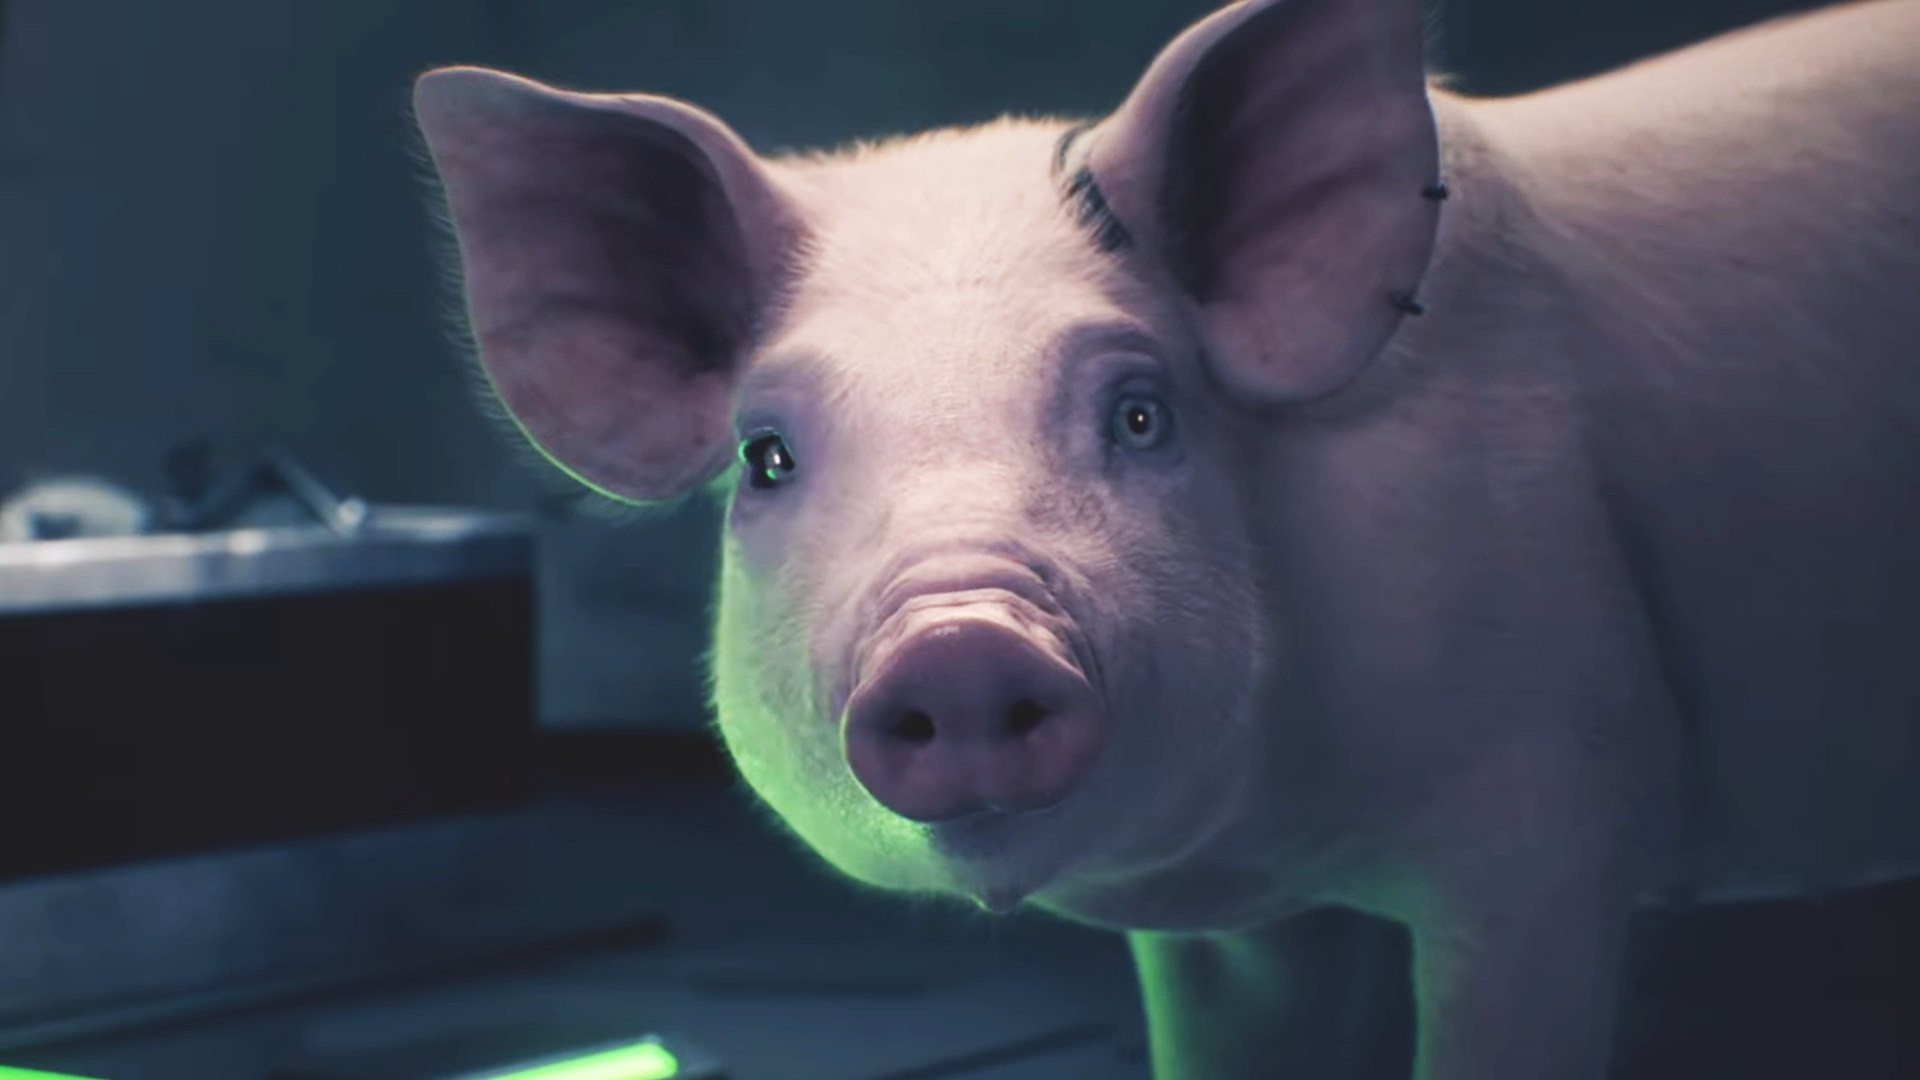 This hyper-intelligent pig named Charlotte is all I needed to get me completely locked into this Mass Effect veteran's new space RPG